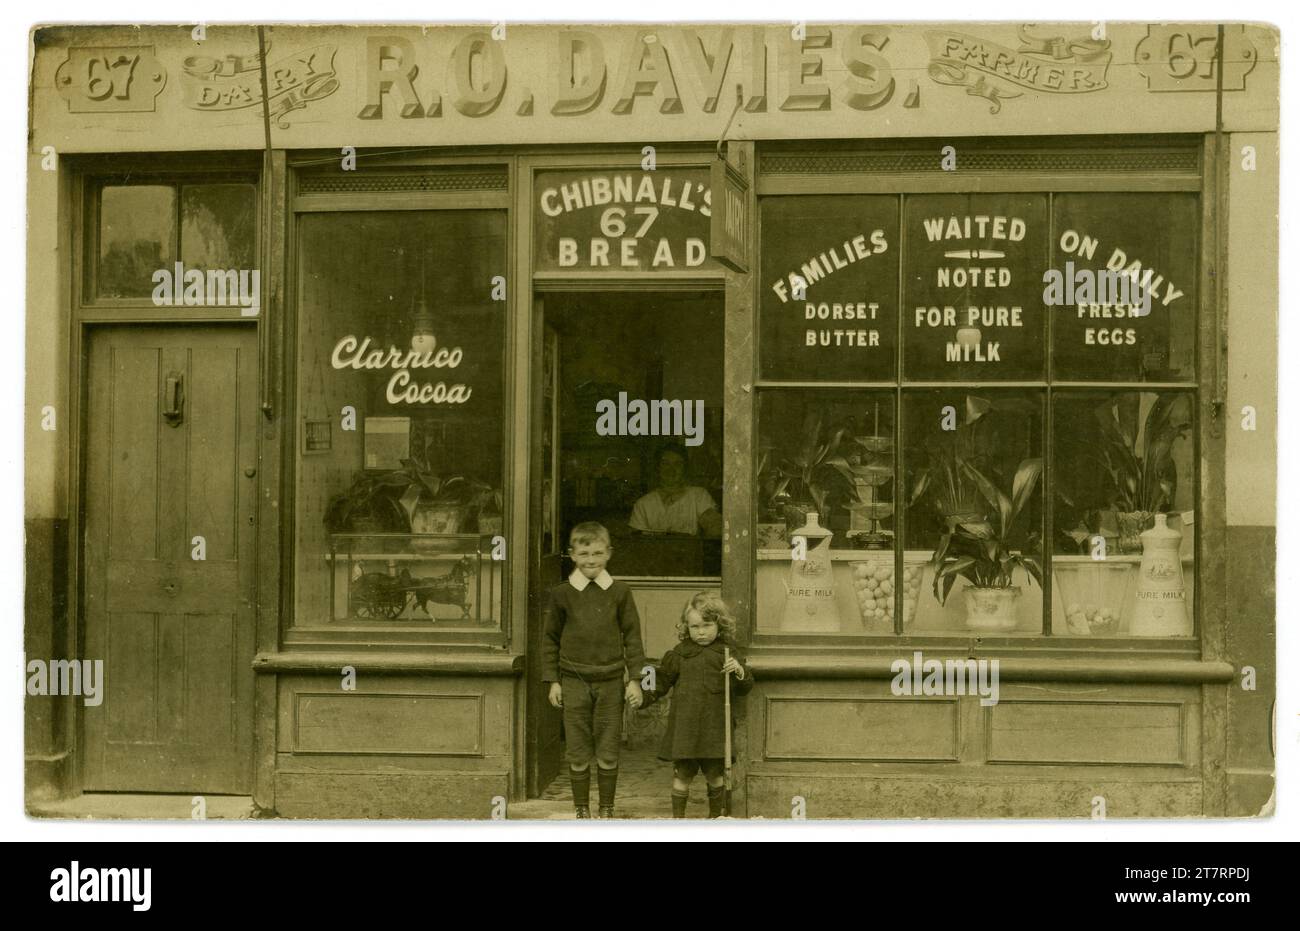 Original postcard of a smiling boy and his brother (who holds a toy rifle) standing outside his parent's shop above him is a sign for R O Davies Dairy Farmer. The shop sells mainly dairy produce and the shop window is advertising Dorset Butter, pure milk and eggs and that 'families are waited on daily'. Circa 1915 from lady shopkeeper's hairstyle. There is an advert for Chibnall's Bread above the door. Chibnall's bakery was a  London company. U.K. Stock Photo